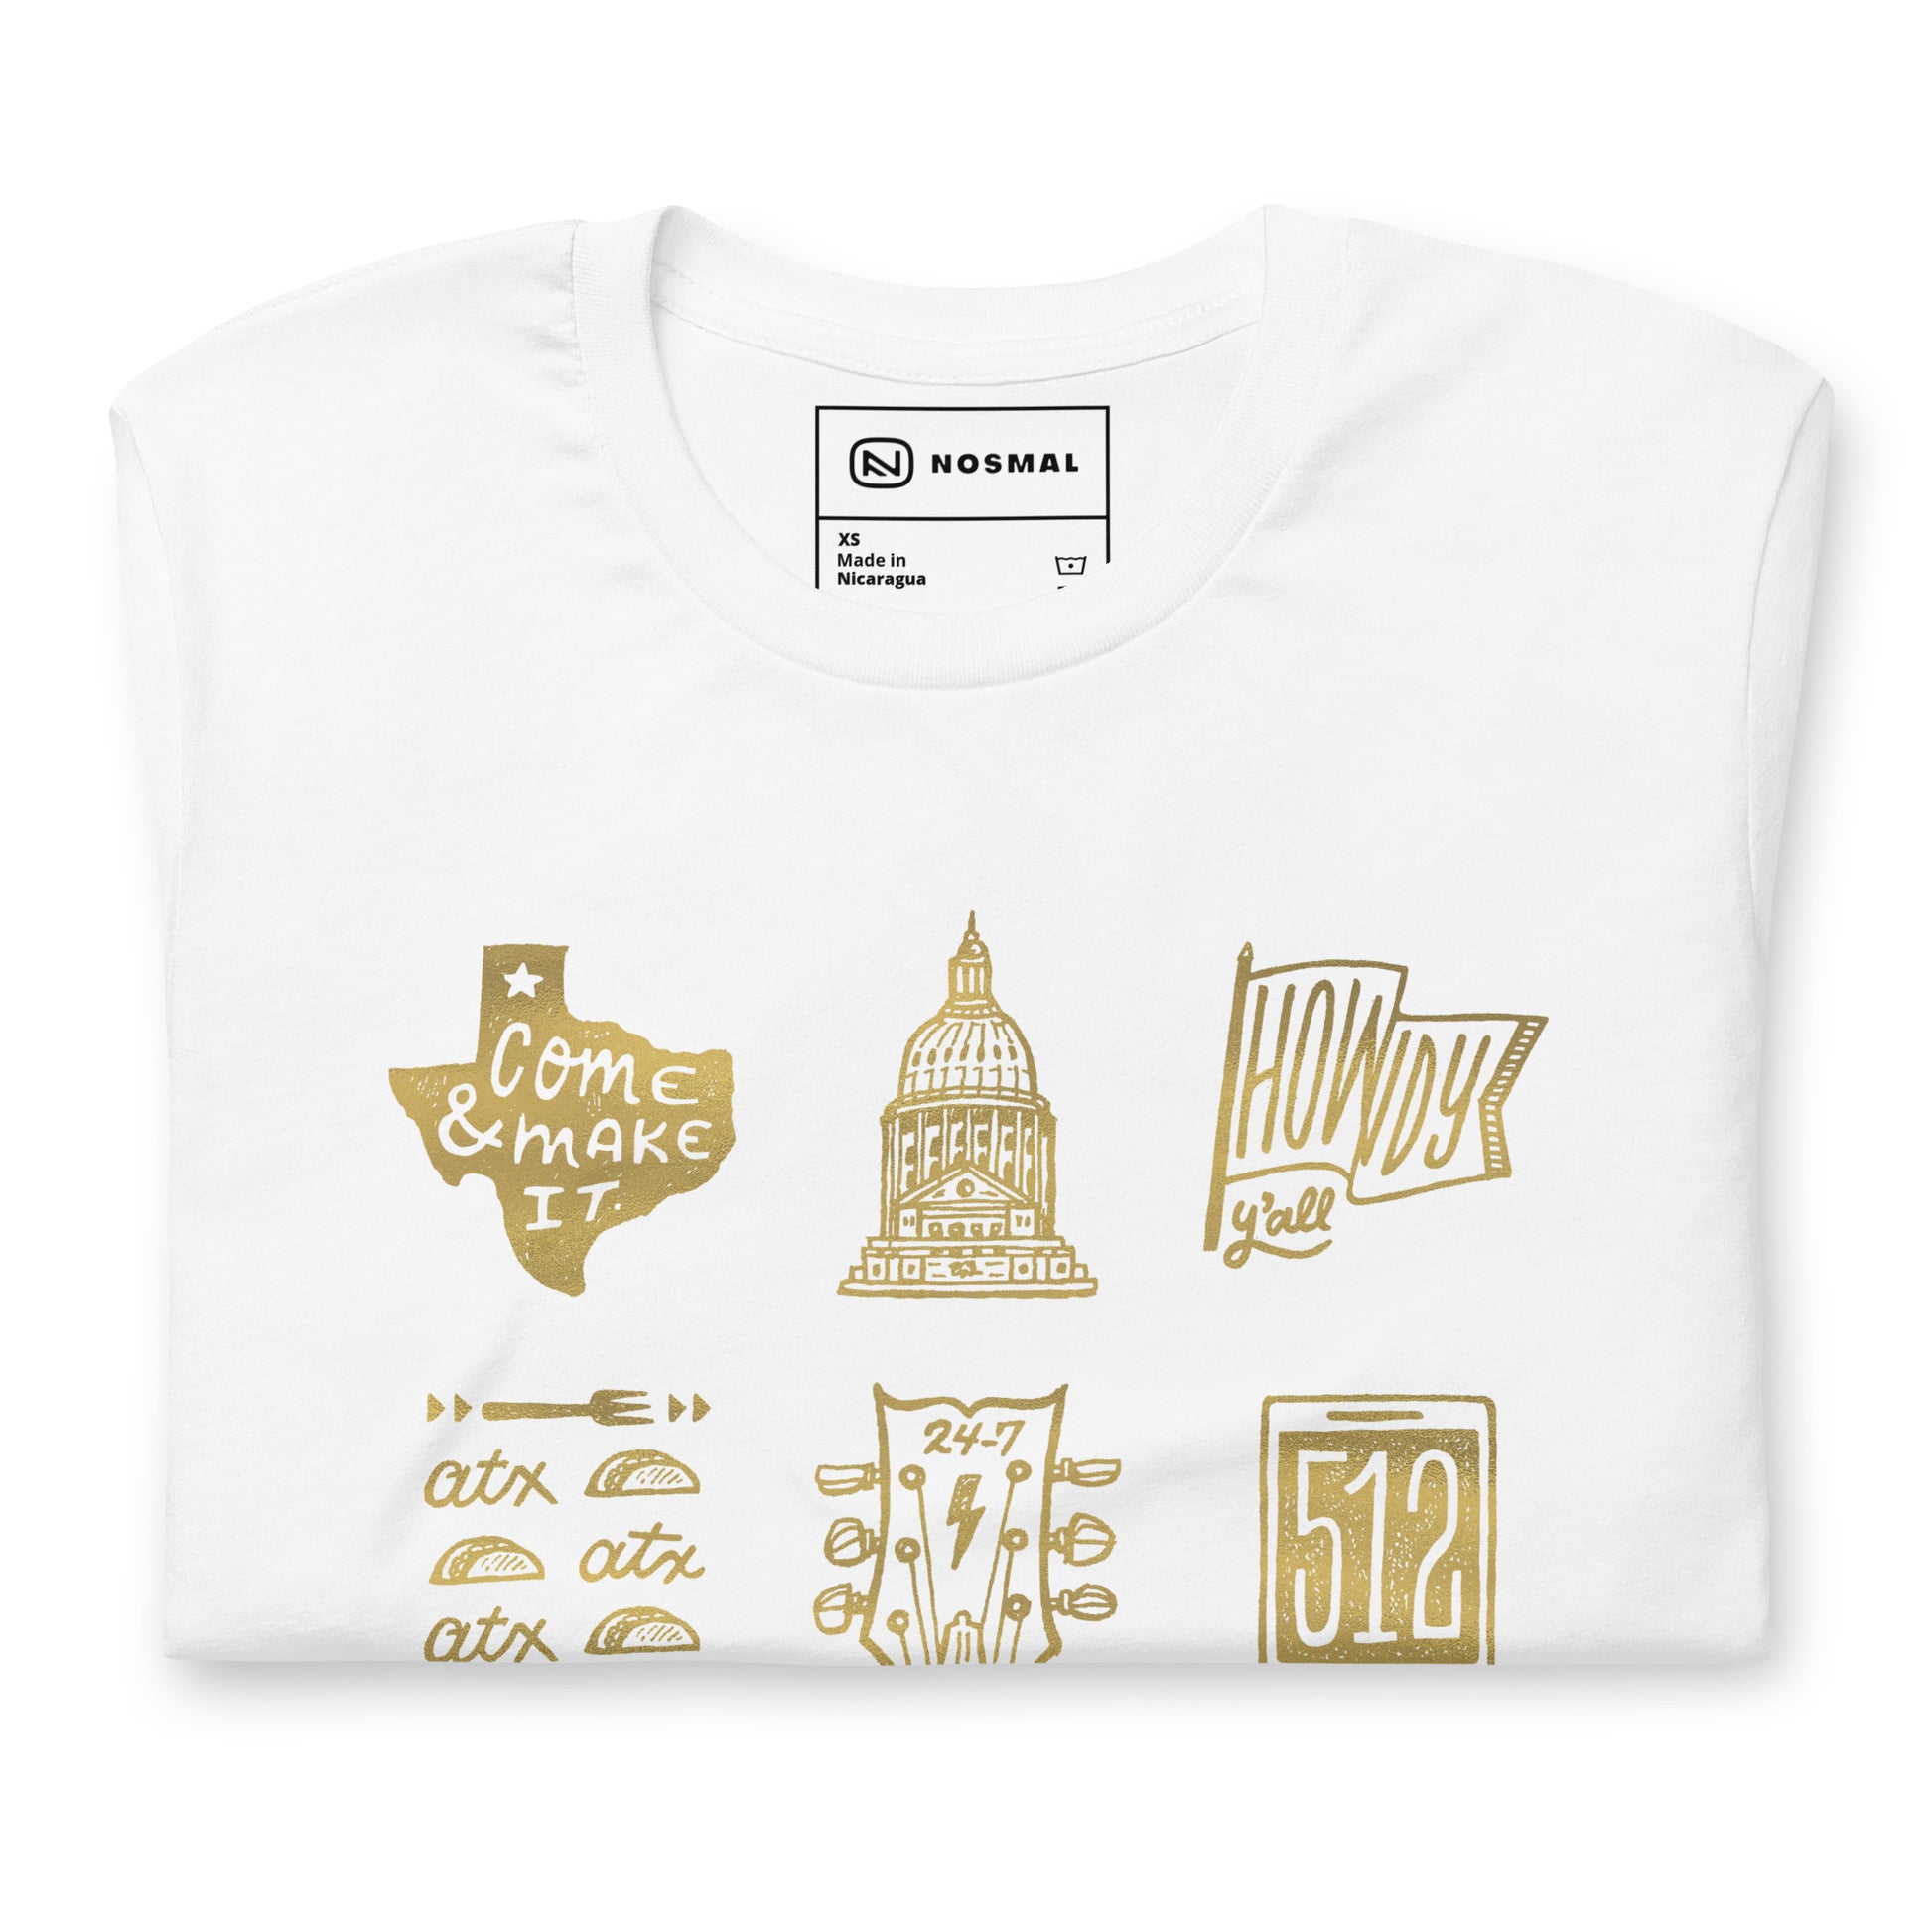 Top down view of ode to 512 gold design on white unisex t-shirt.